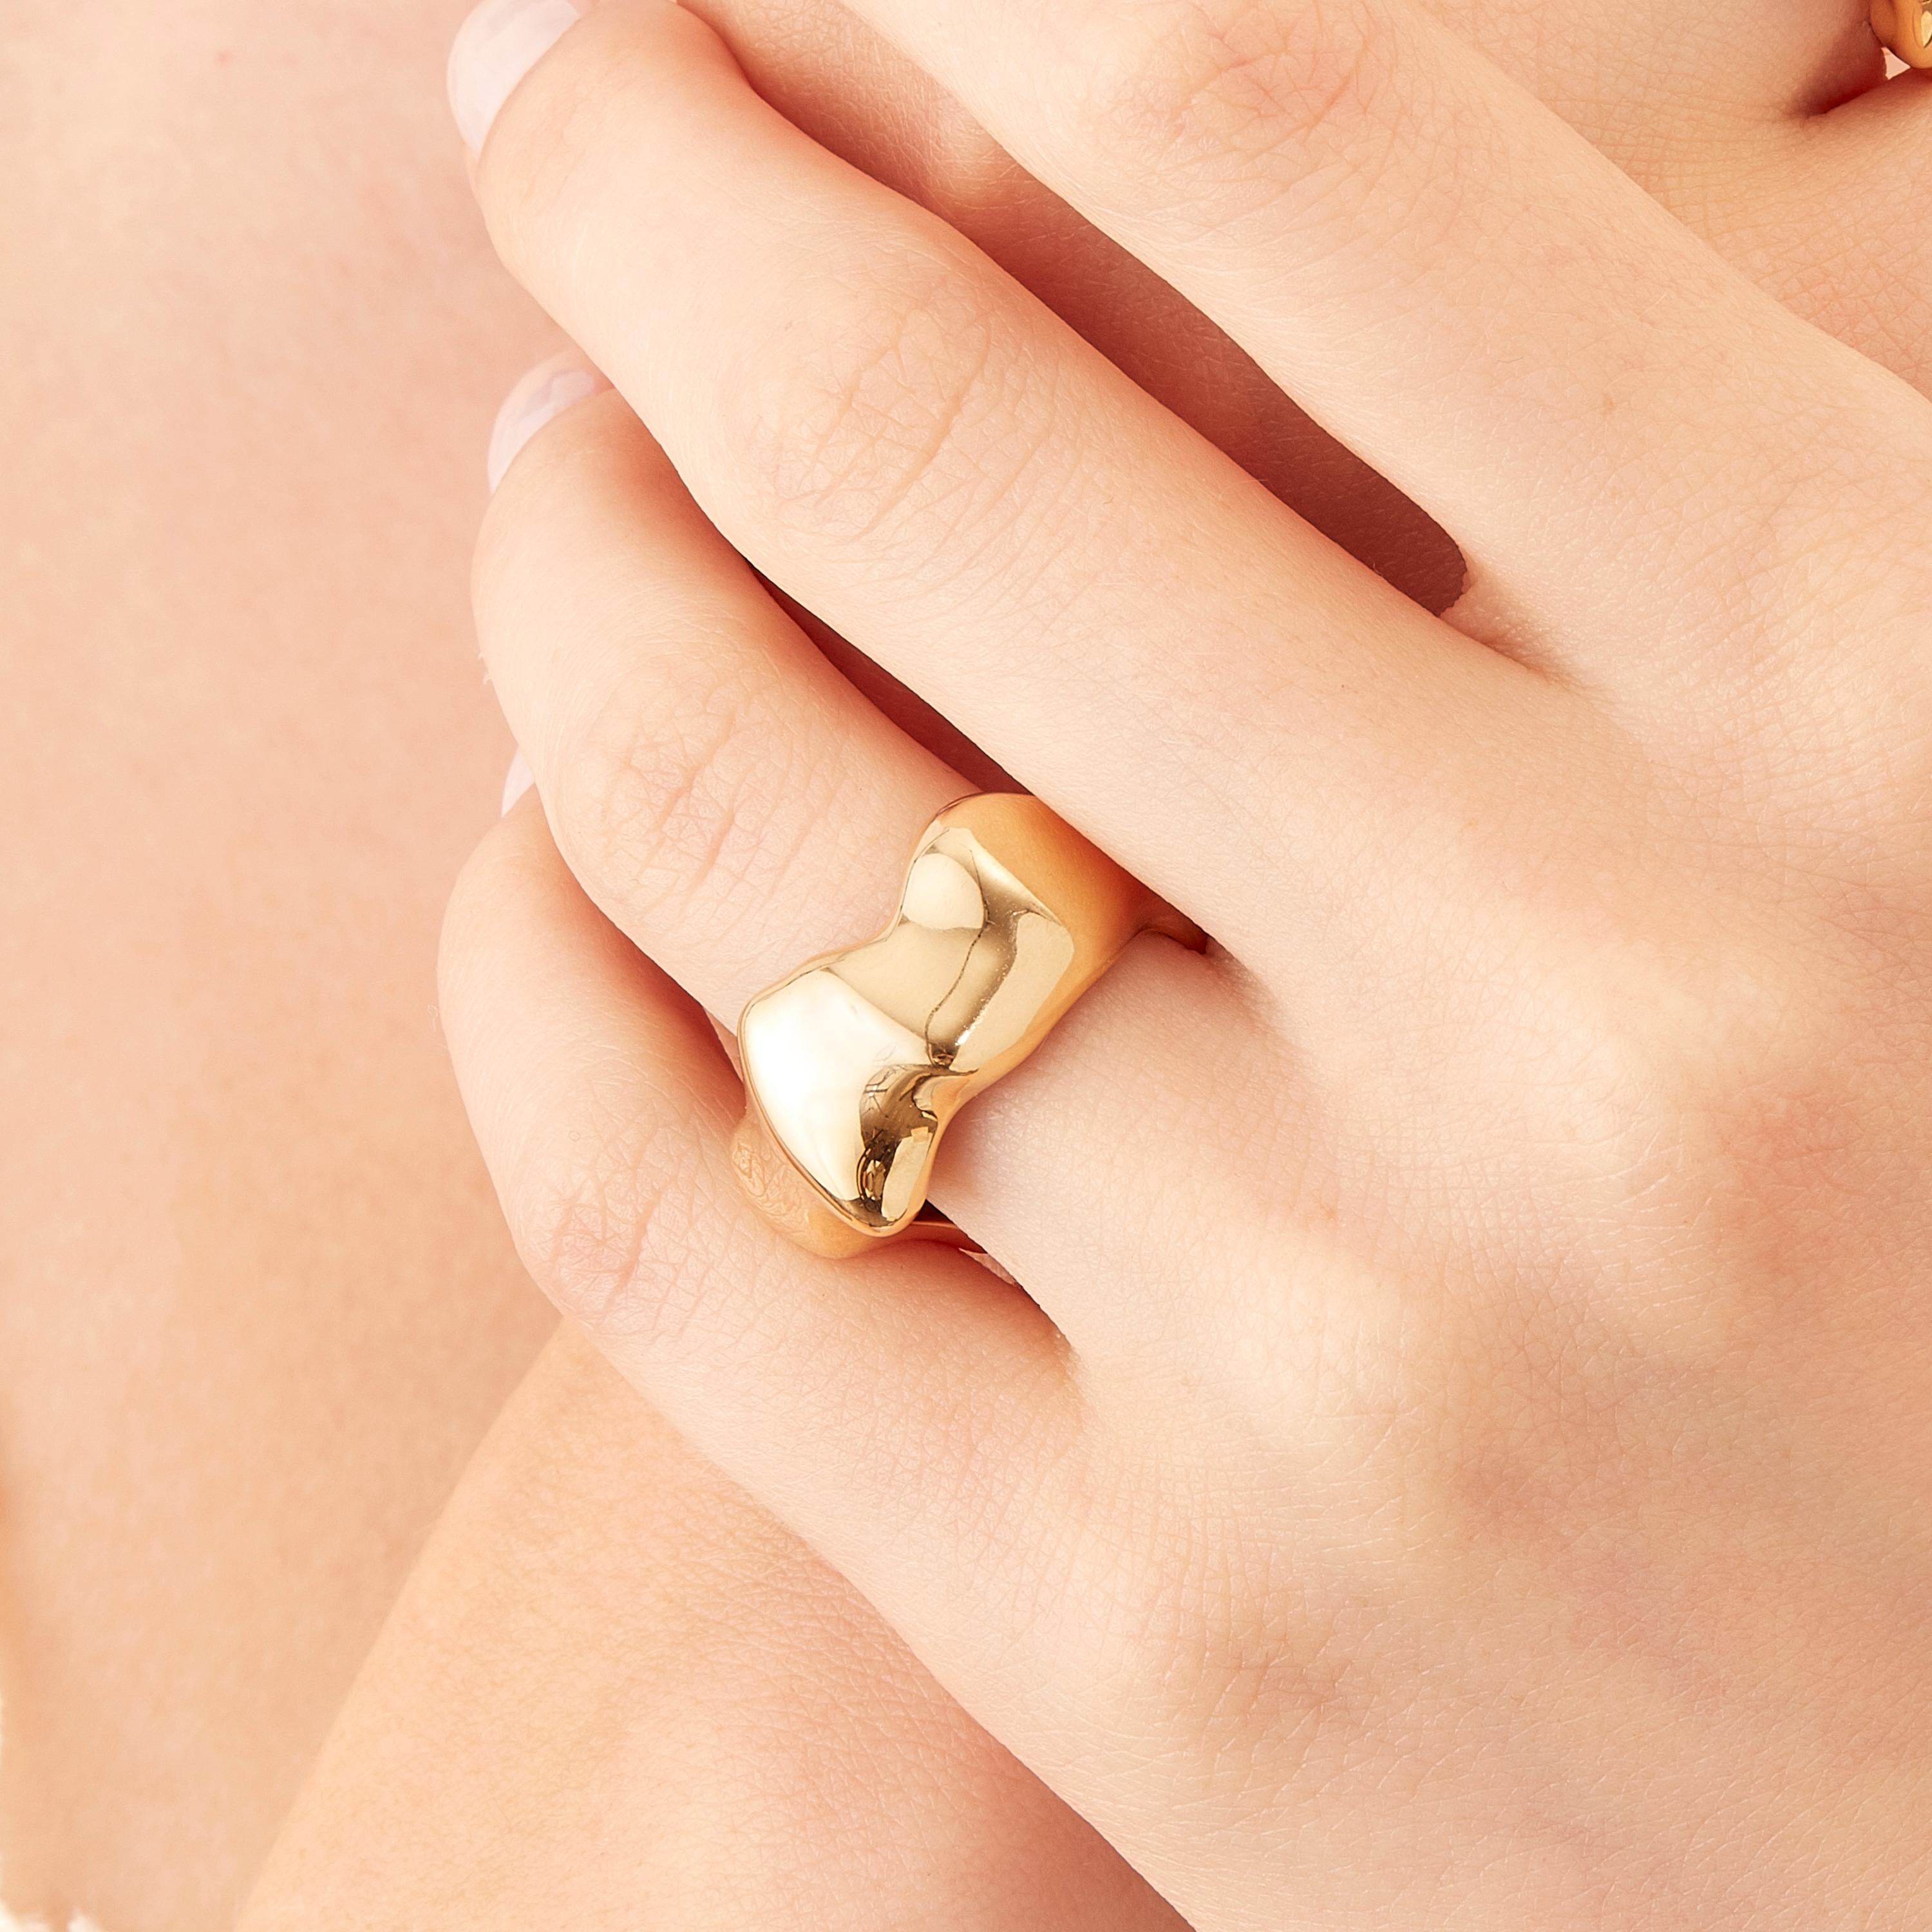 Made by hand in Nathalie Jean's Milan atelier in limited edition, Mercure Fashion Ring is in 18 karat rosé gold, a warm, sophisticated color close to yellow gold. Small, delicate, ebbing sculpture with seemingly random forms, these supple shapes are